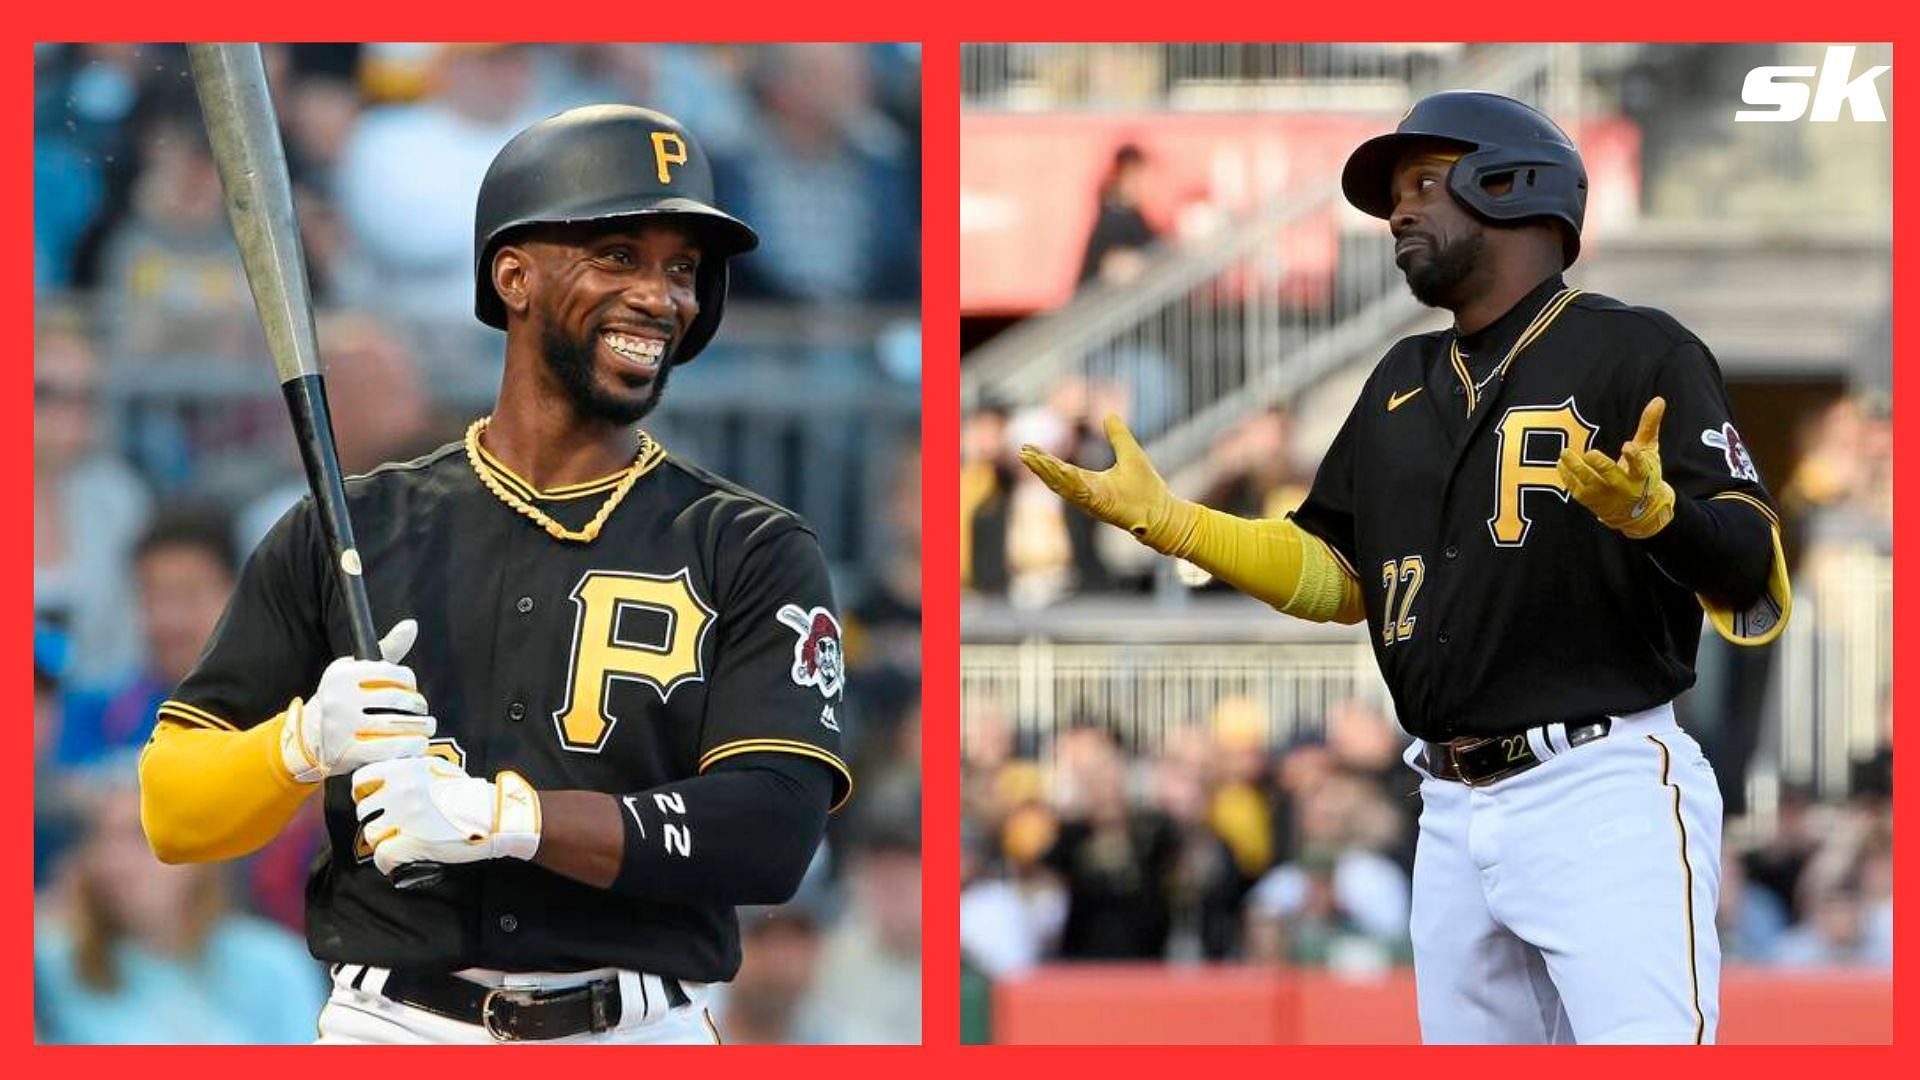 Pittsburgh Pirates' Andrew McCutchen expresses surprise with his stats  during Anthrocon